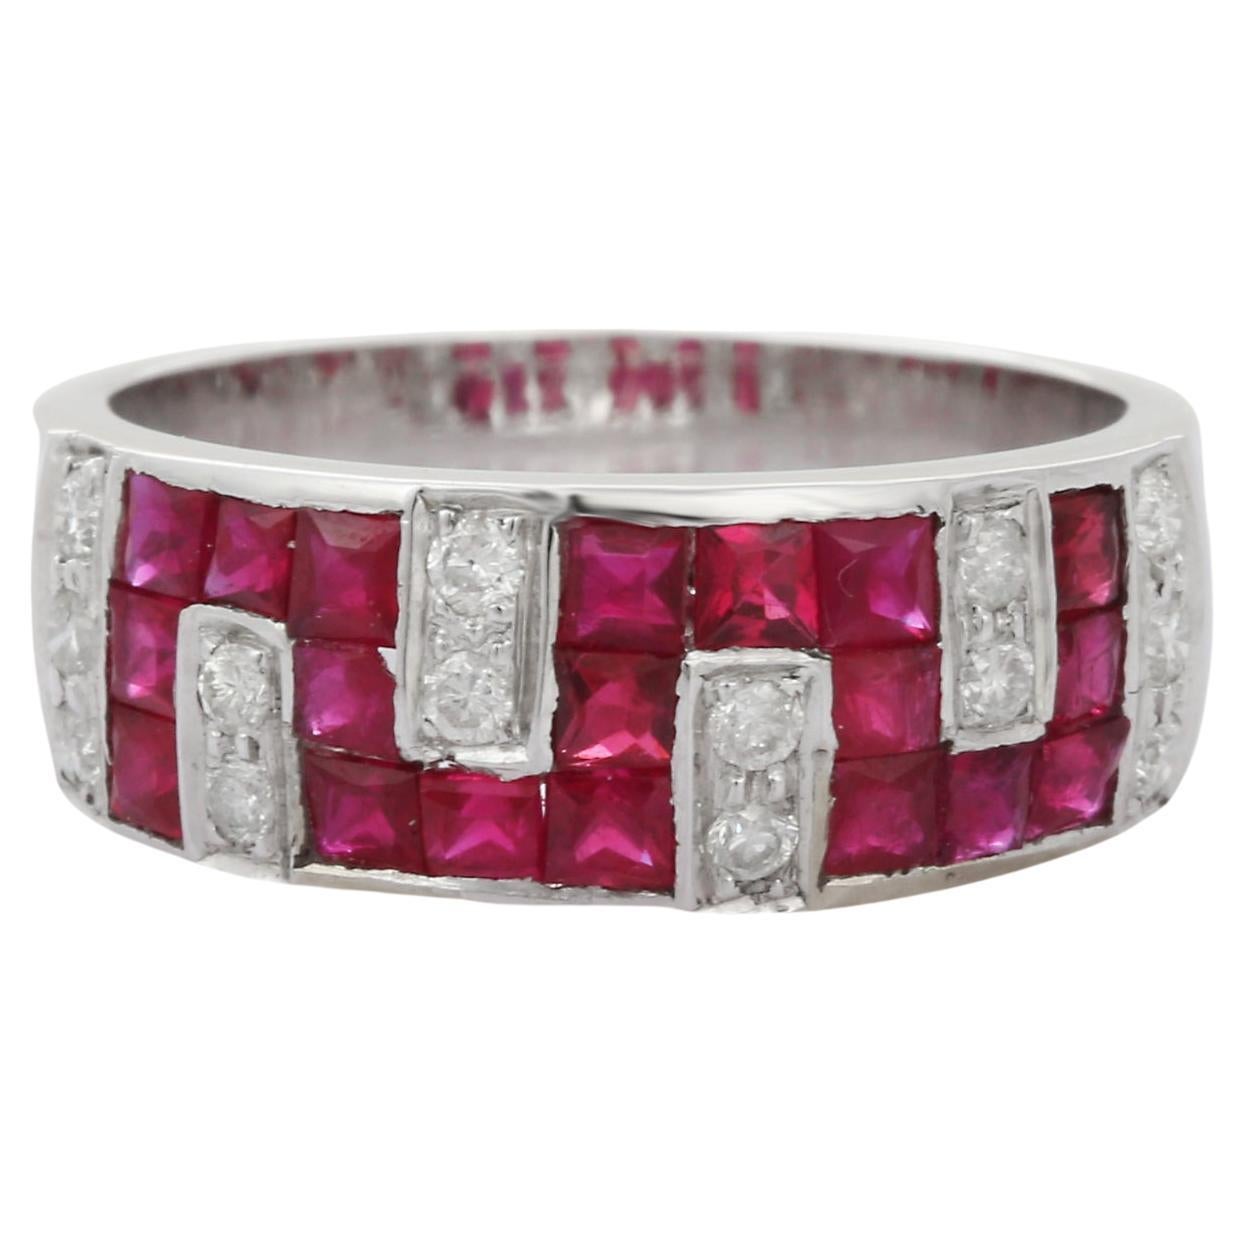 For Sale:  Classical Greek Style Ruby Diamond Band Ring in 18K Solid White Gold